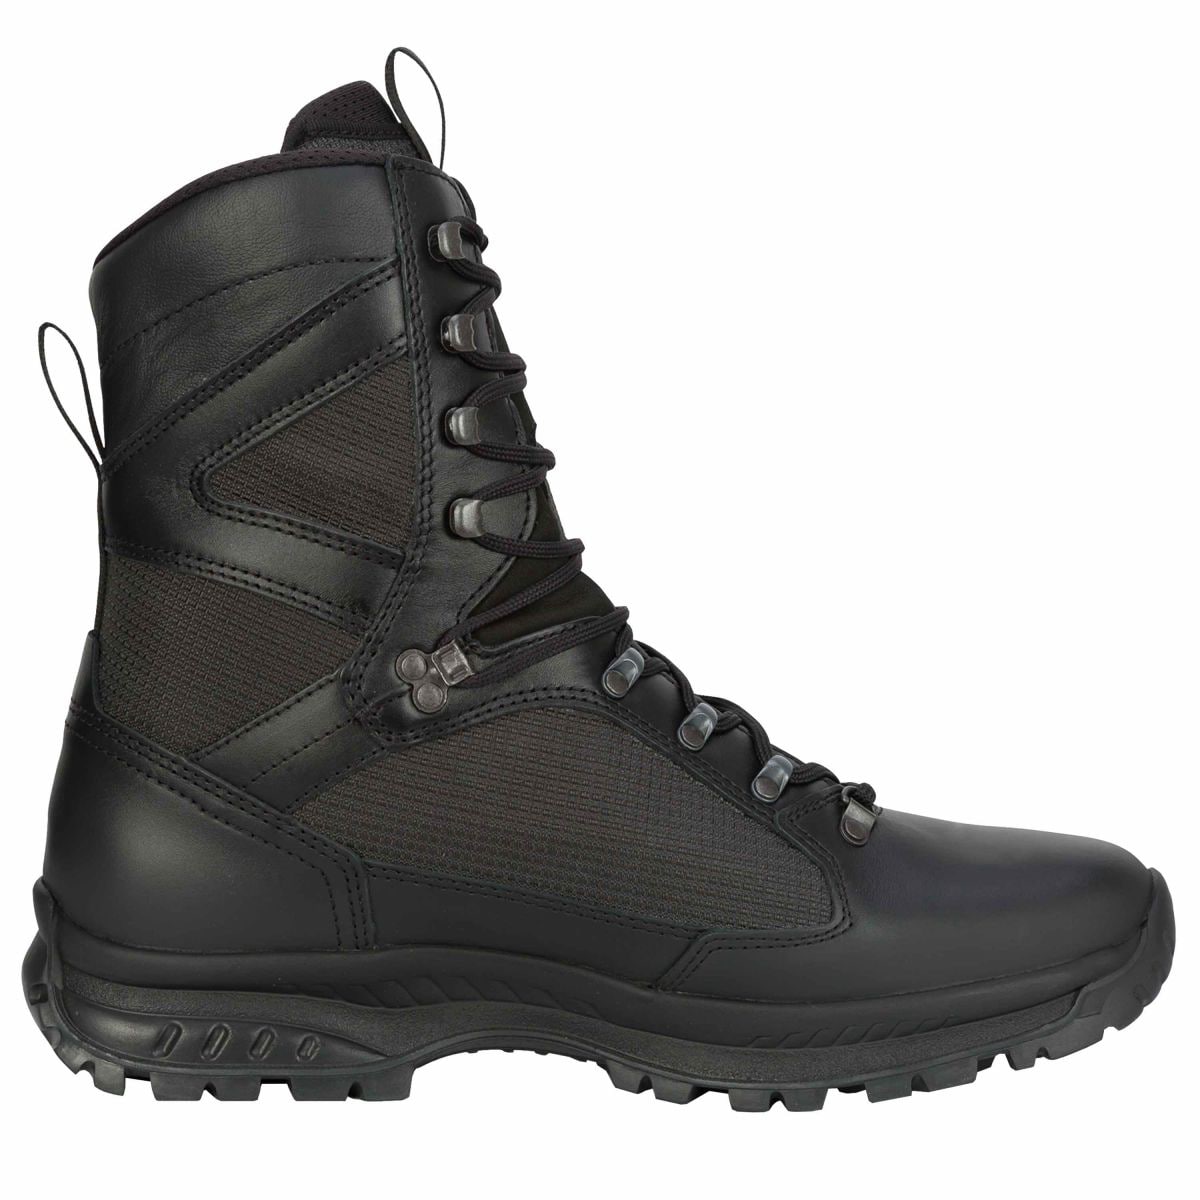 Purchase the Hanwag Boots SFB 3H black by ASMC